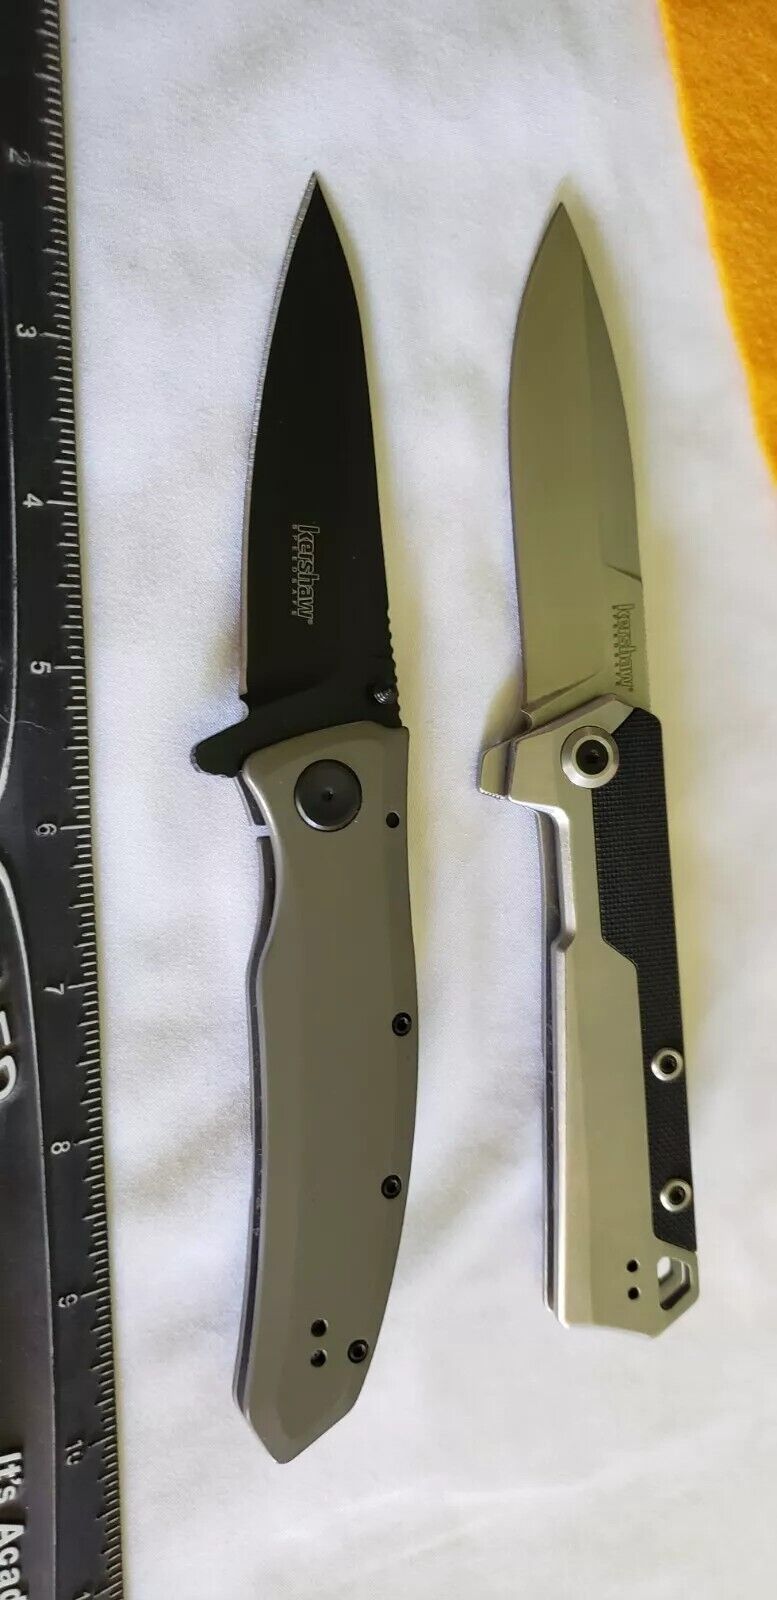 2 KERSHAW KNIVES 2200 GRID AND 3860 OBLIVION ASSISTED OPENING WITH POCKET CLIPS